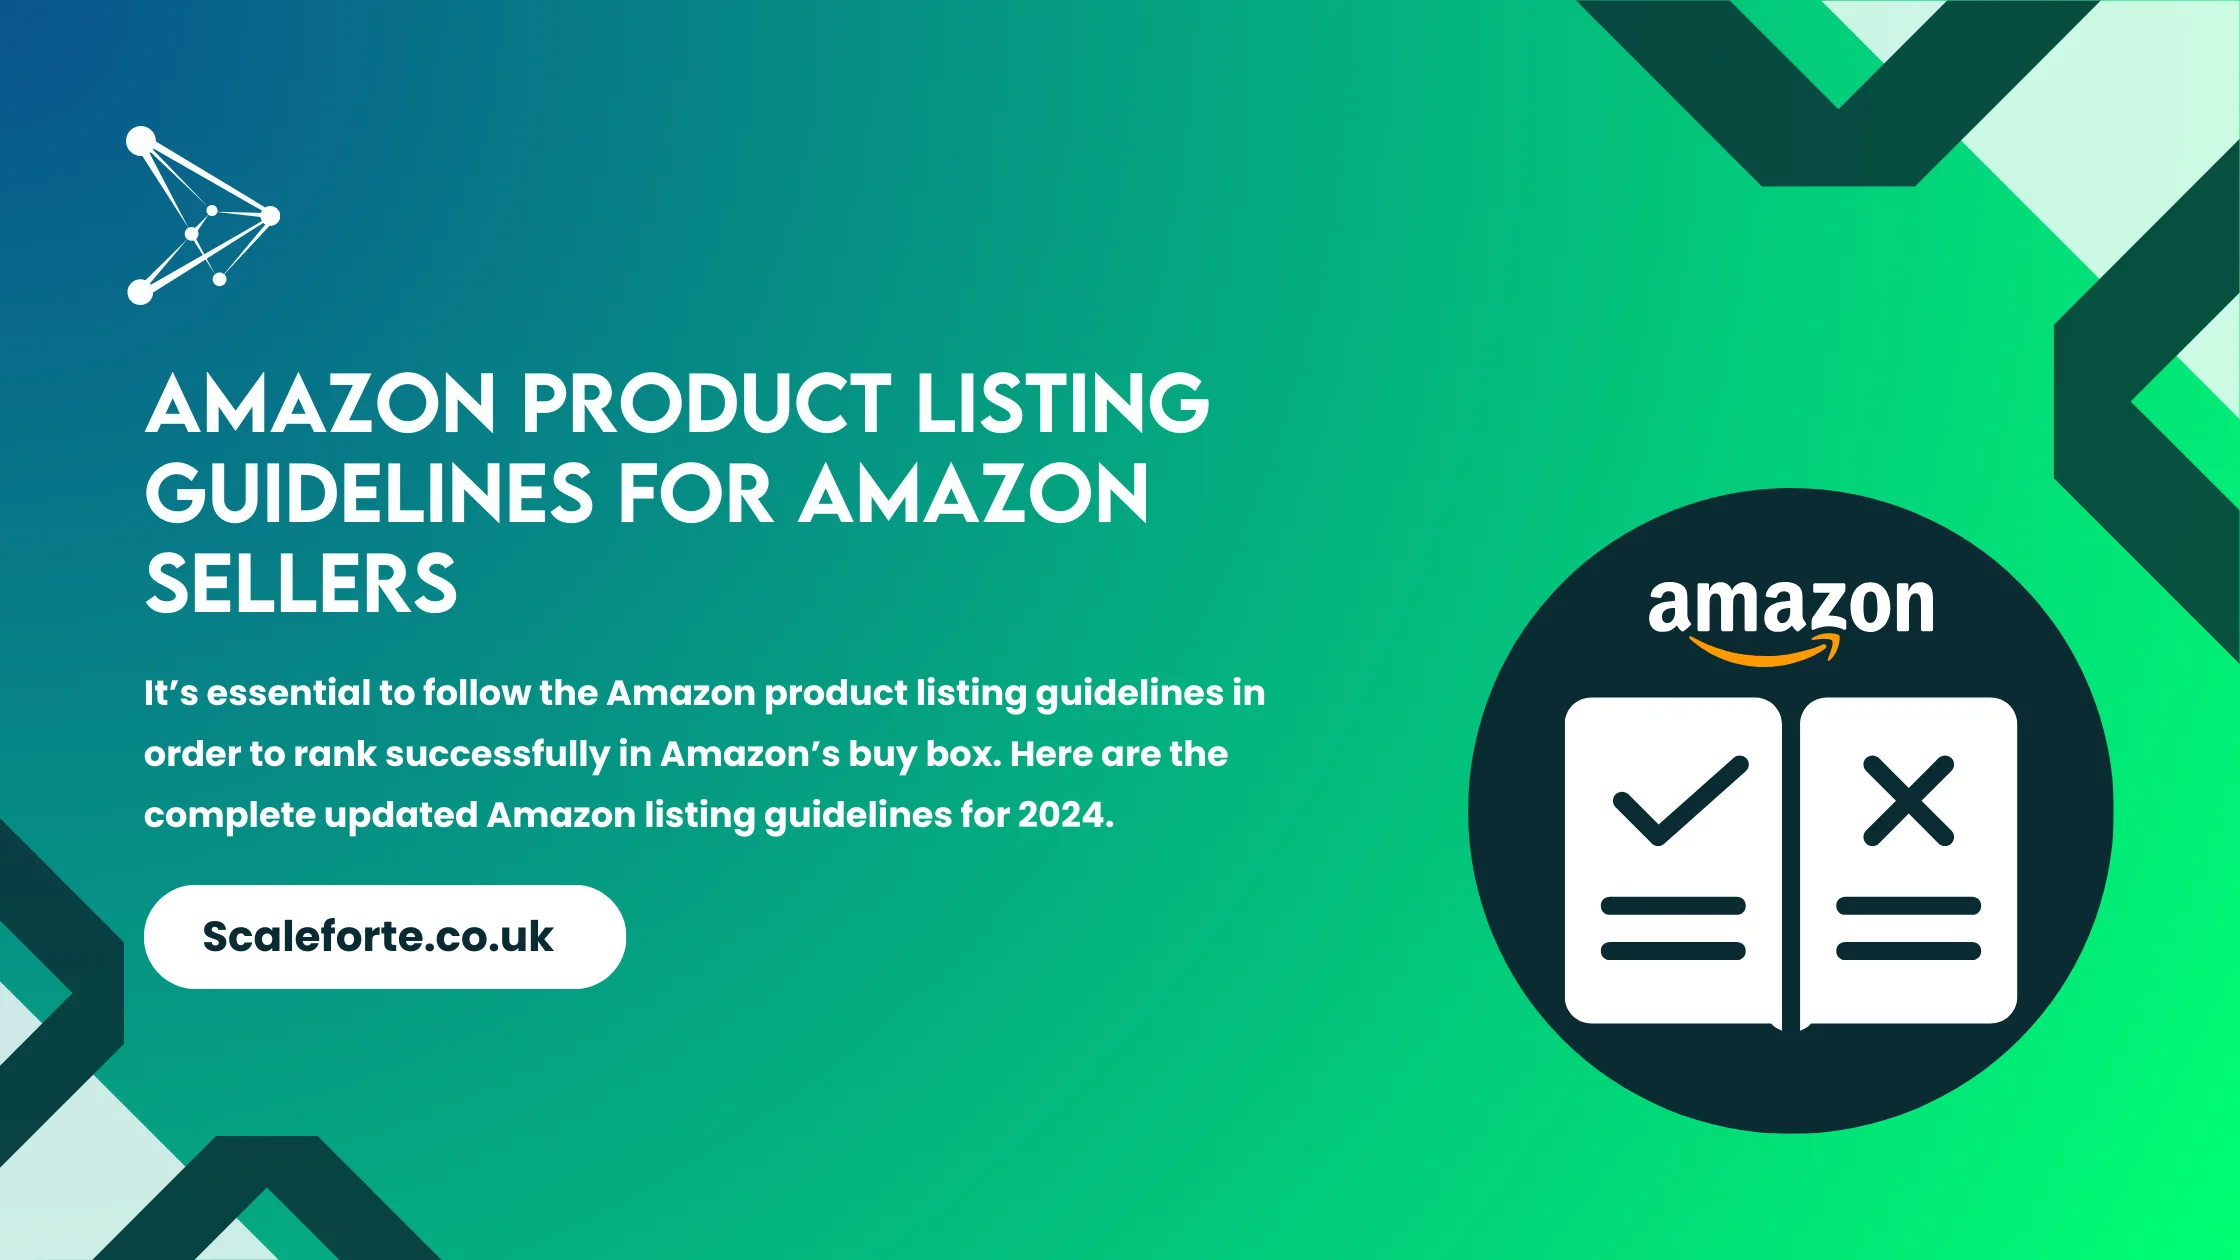 Amazon Product Listing Guidelines